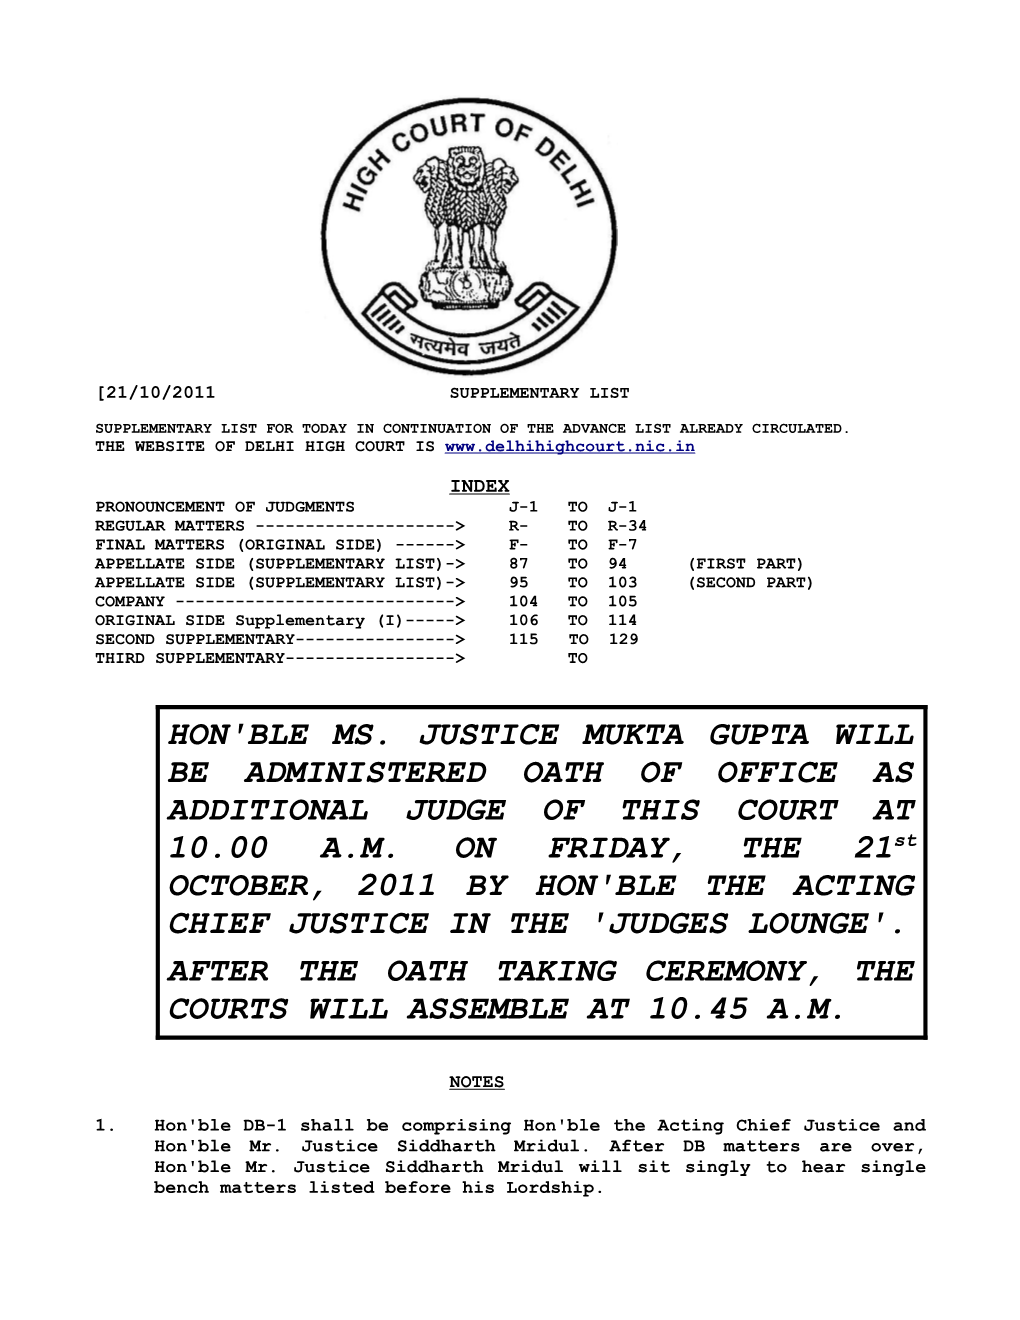 Hon'ble Ms. Justice Mukta Gupta Will Be Administered Oath of Office As Additional Judge of This Court at 10.00 A.M. on Friday, T